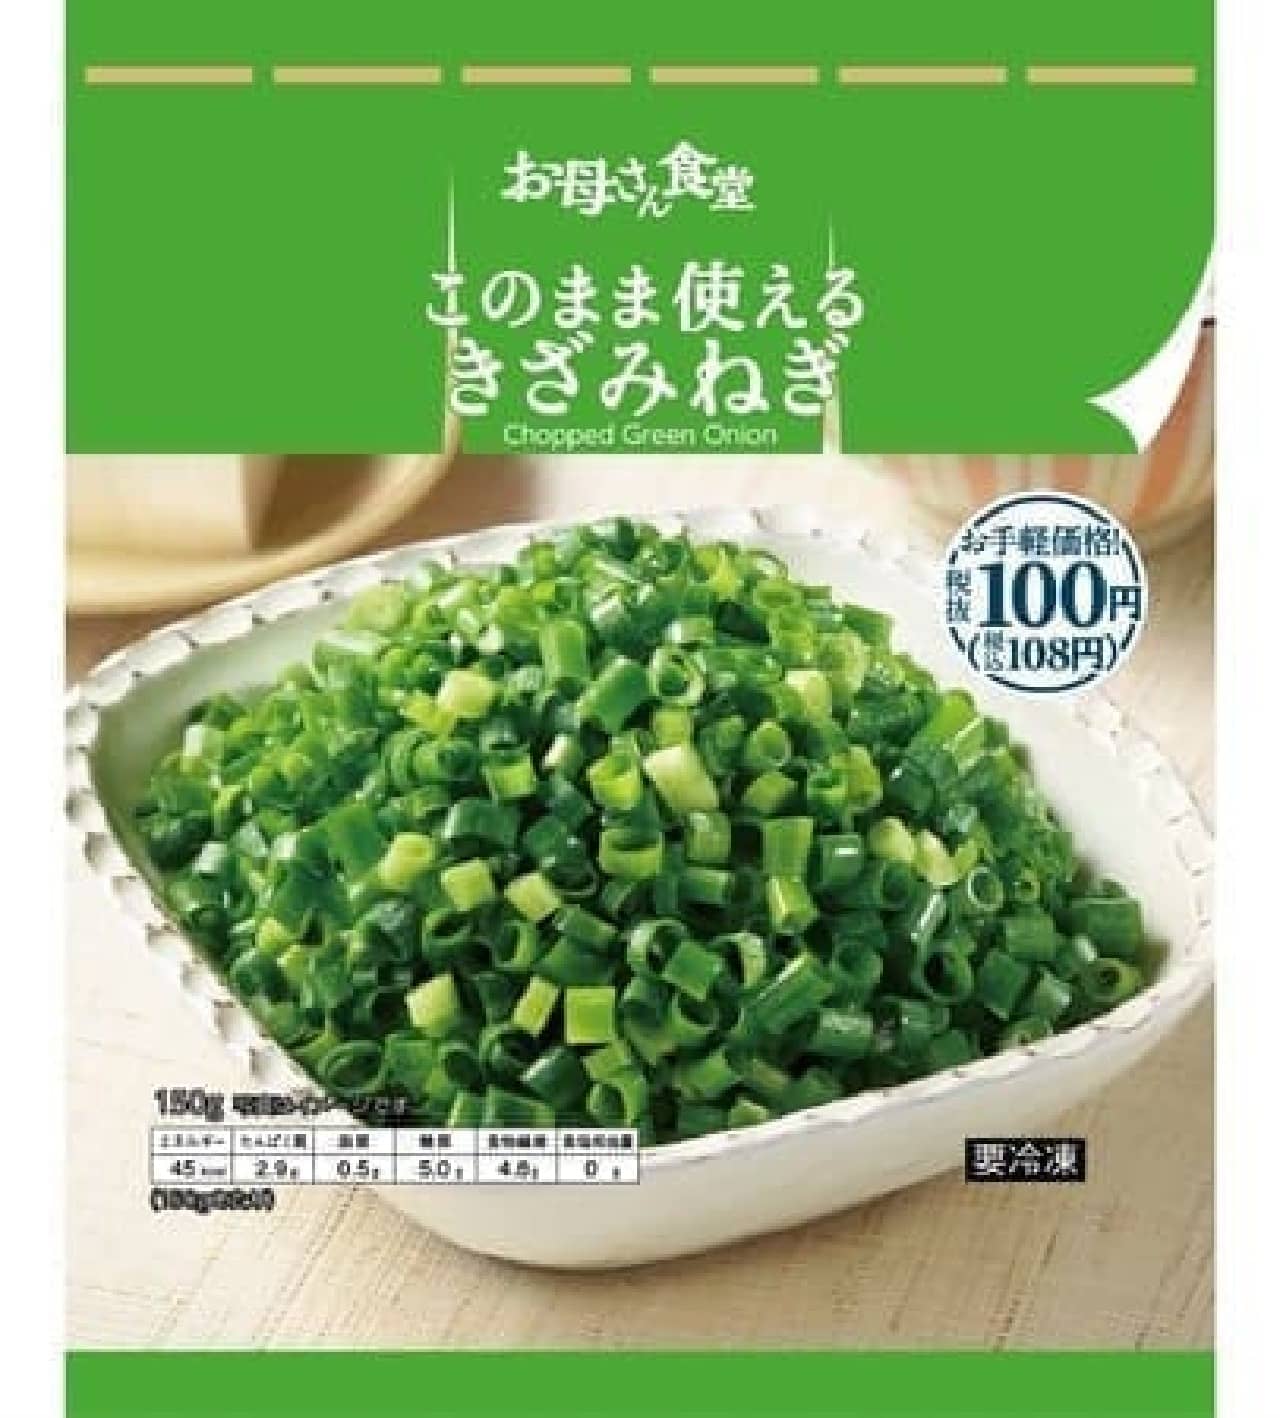 FamilyMart "Kizami green onions that can be used as they are"